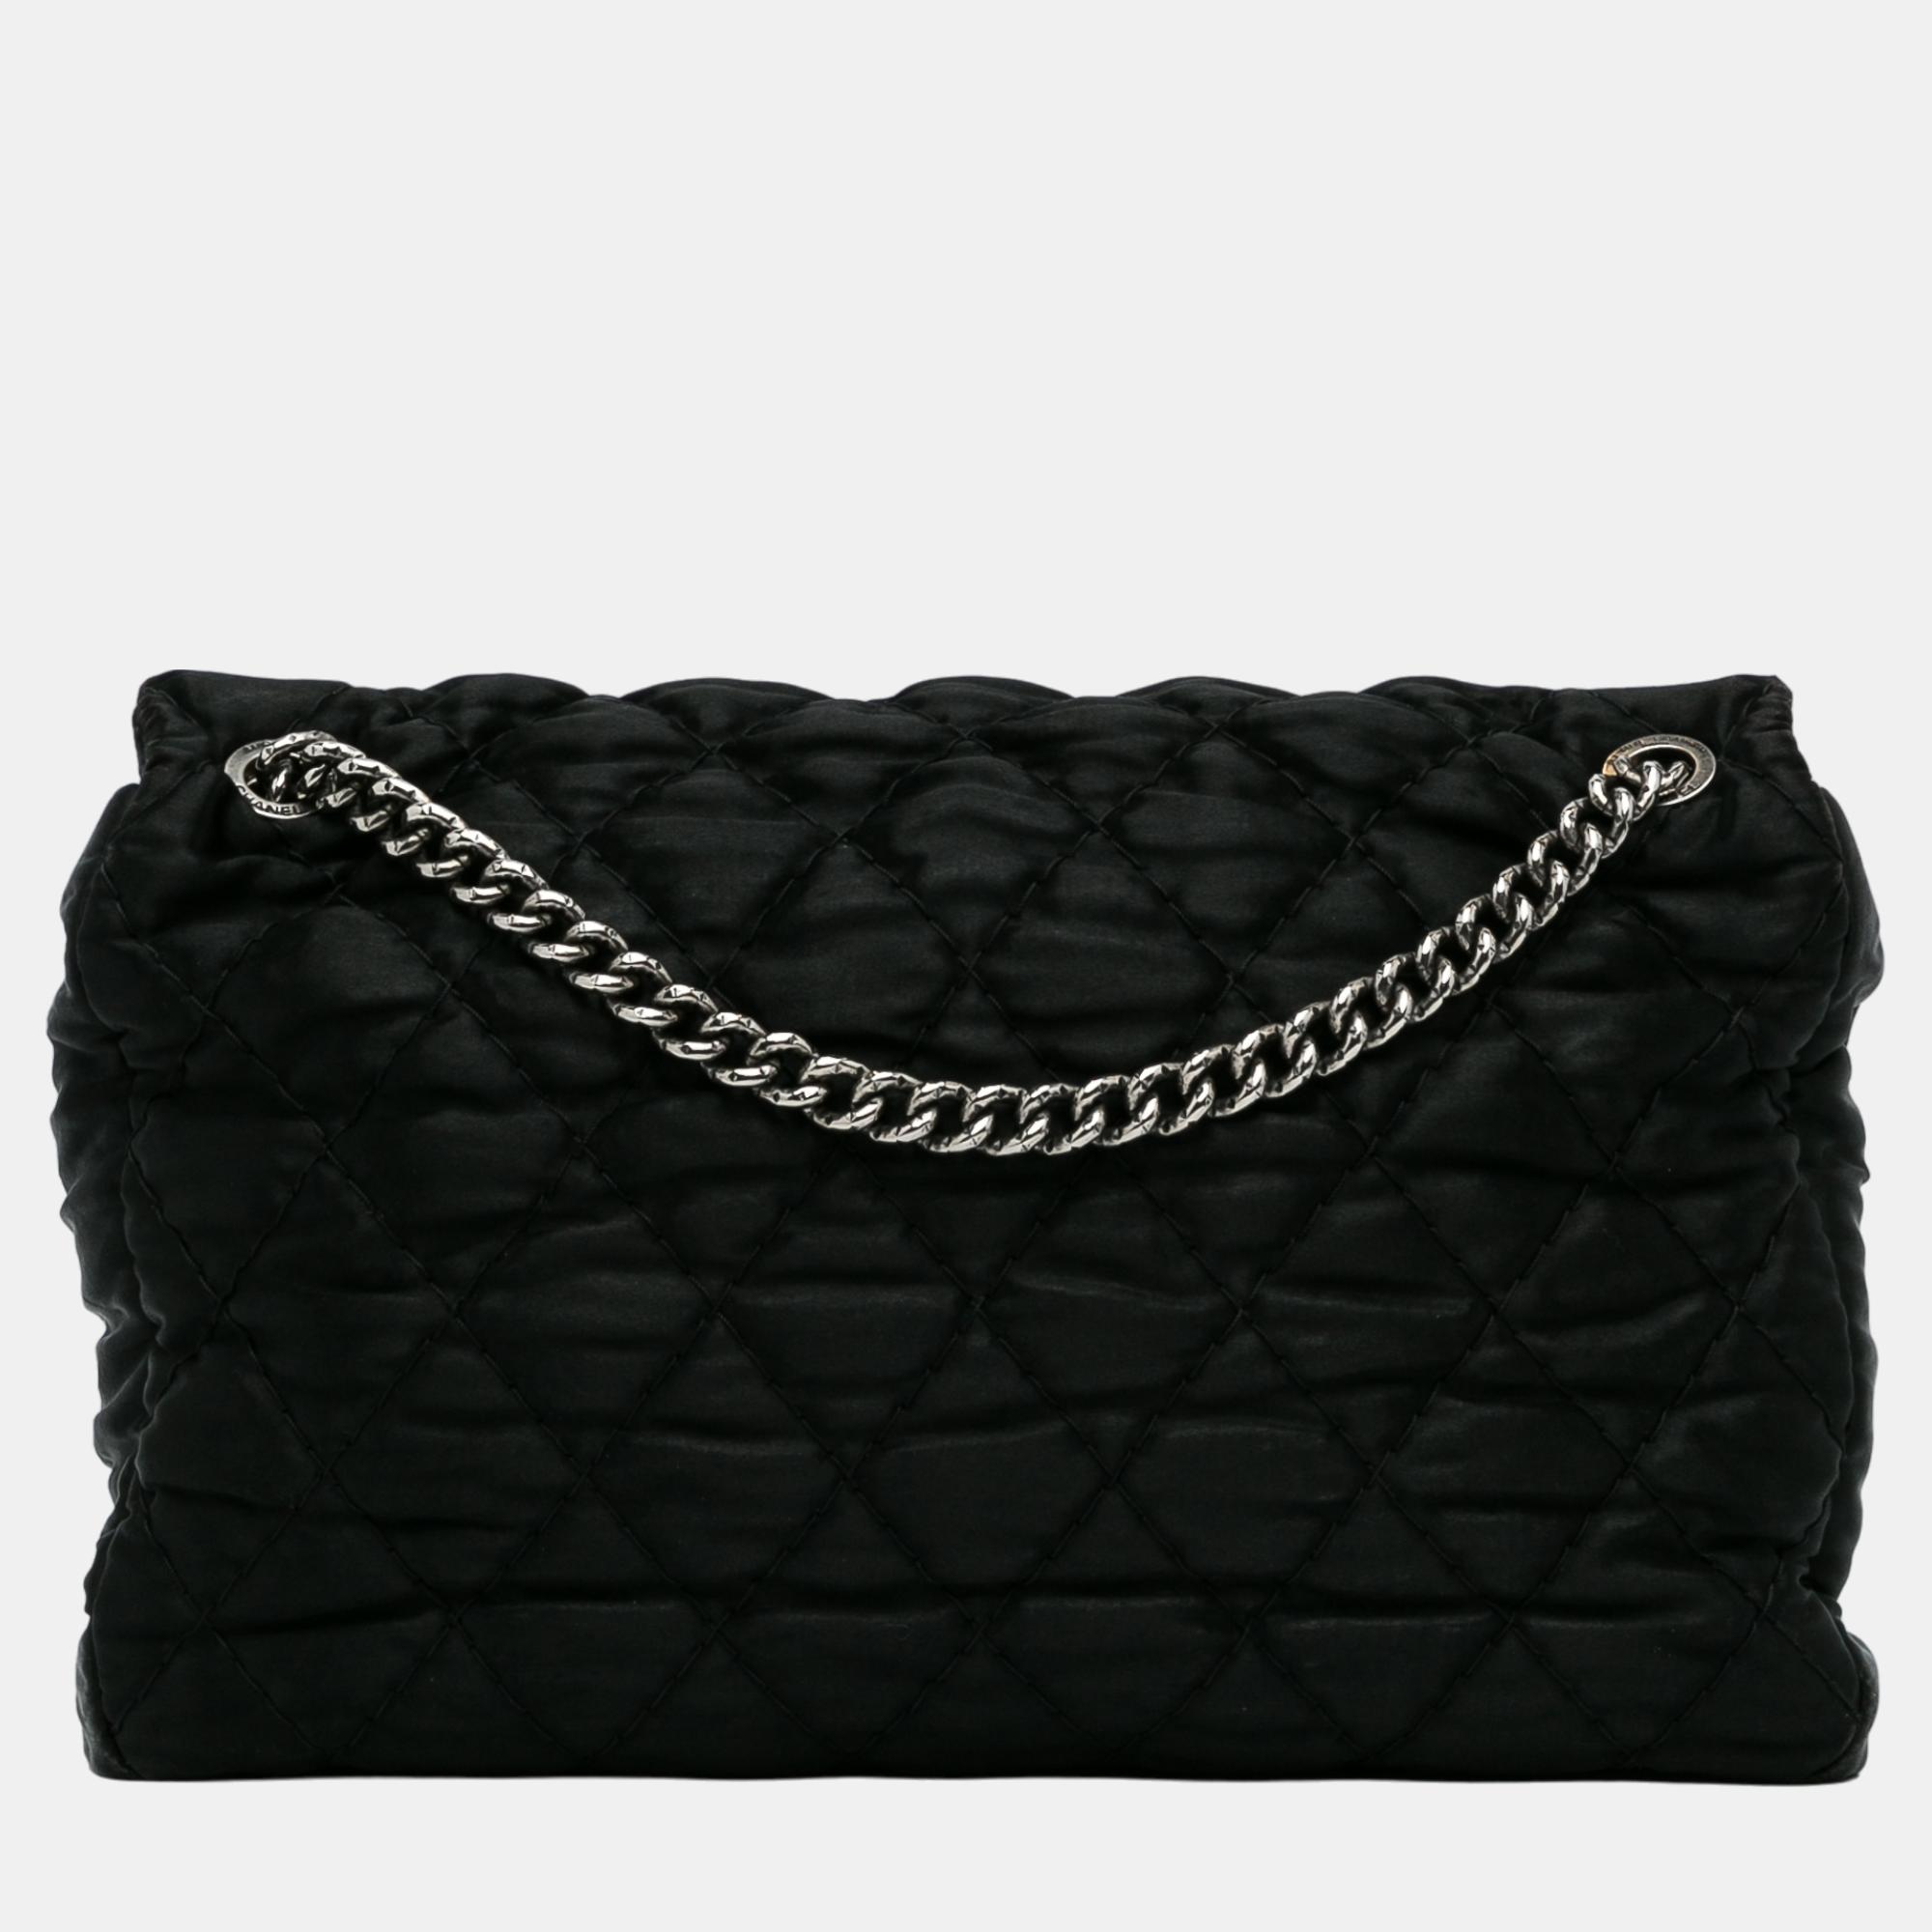 Chanel Black Quilted Satin Chain Flap